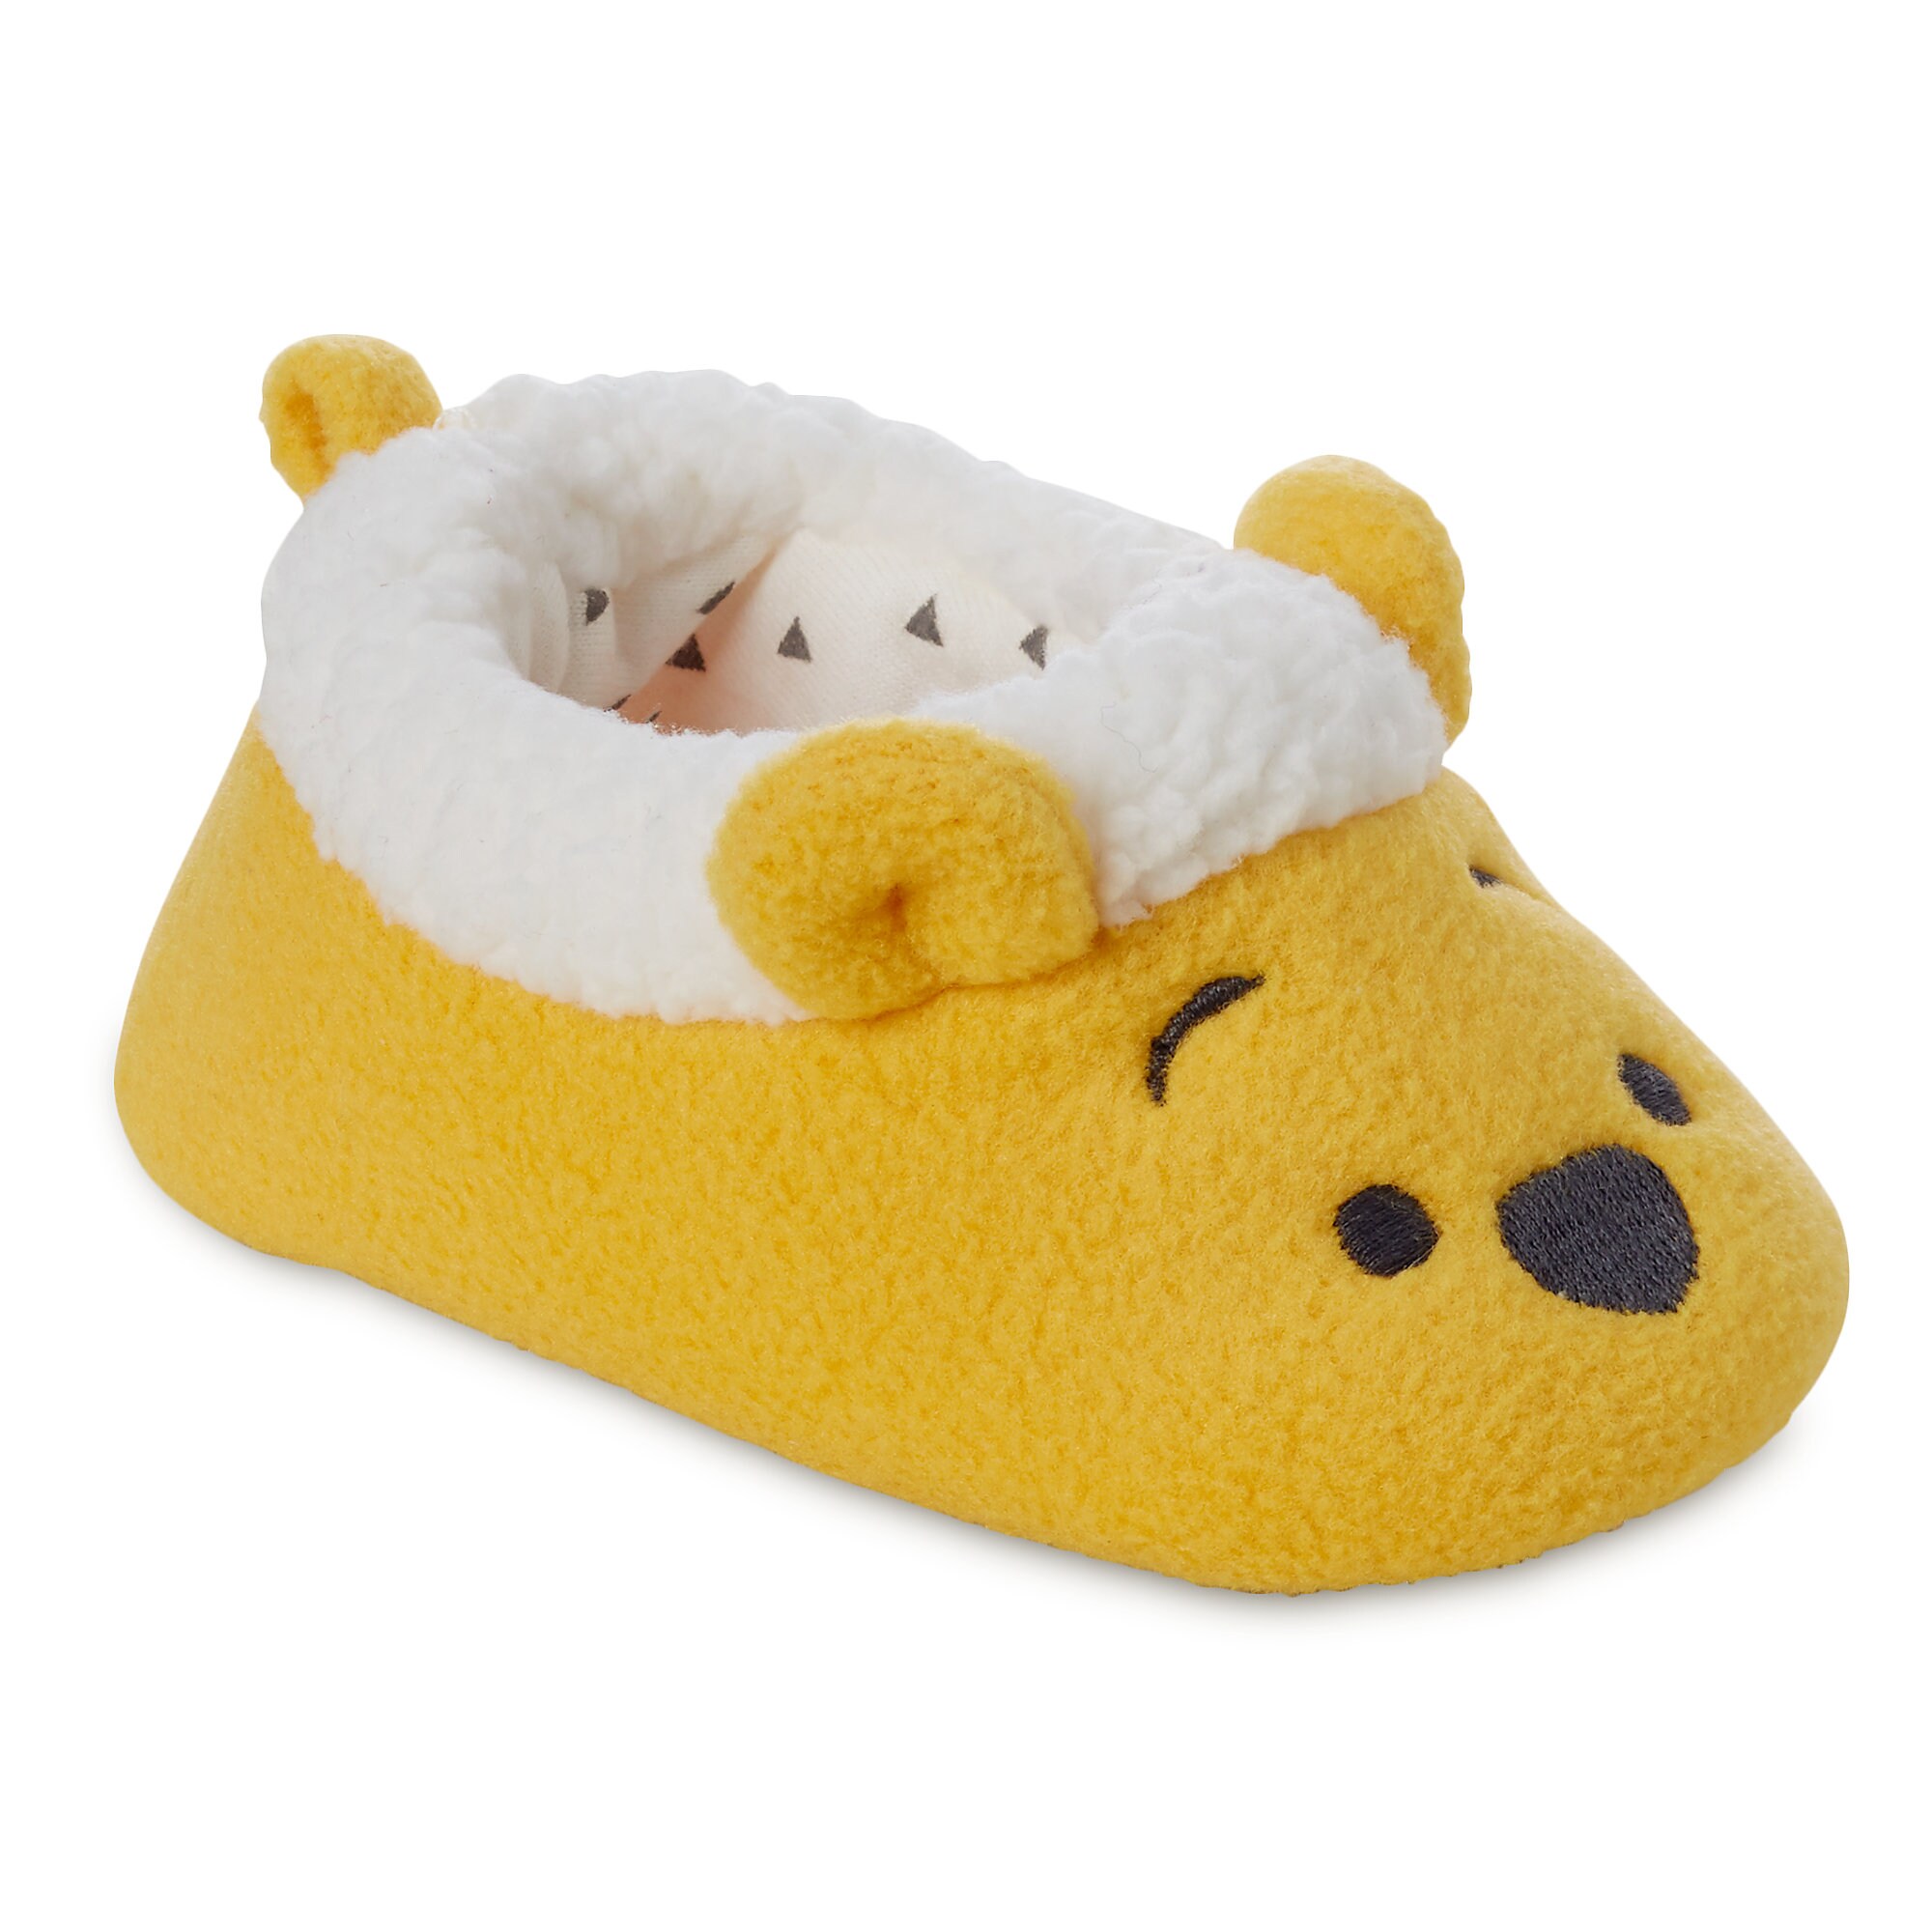 Winnie the Pooh Slippers for Baby